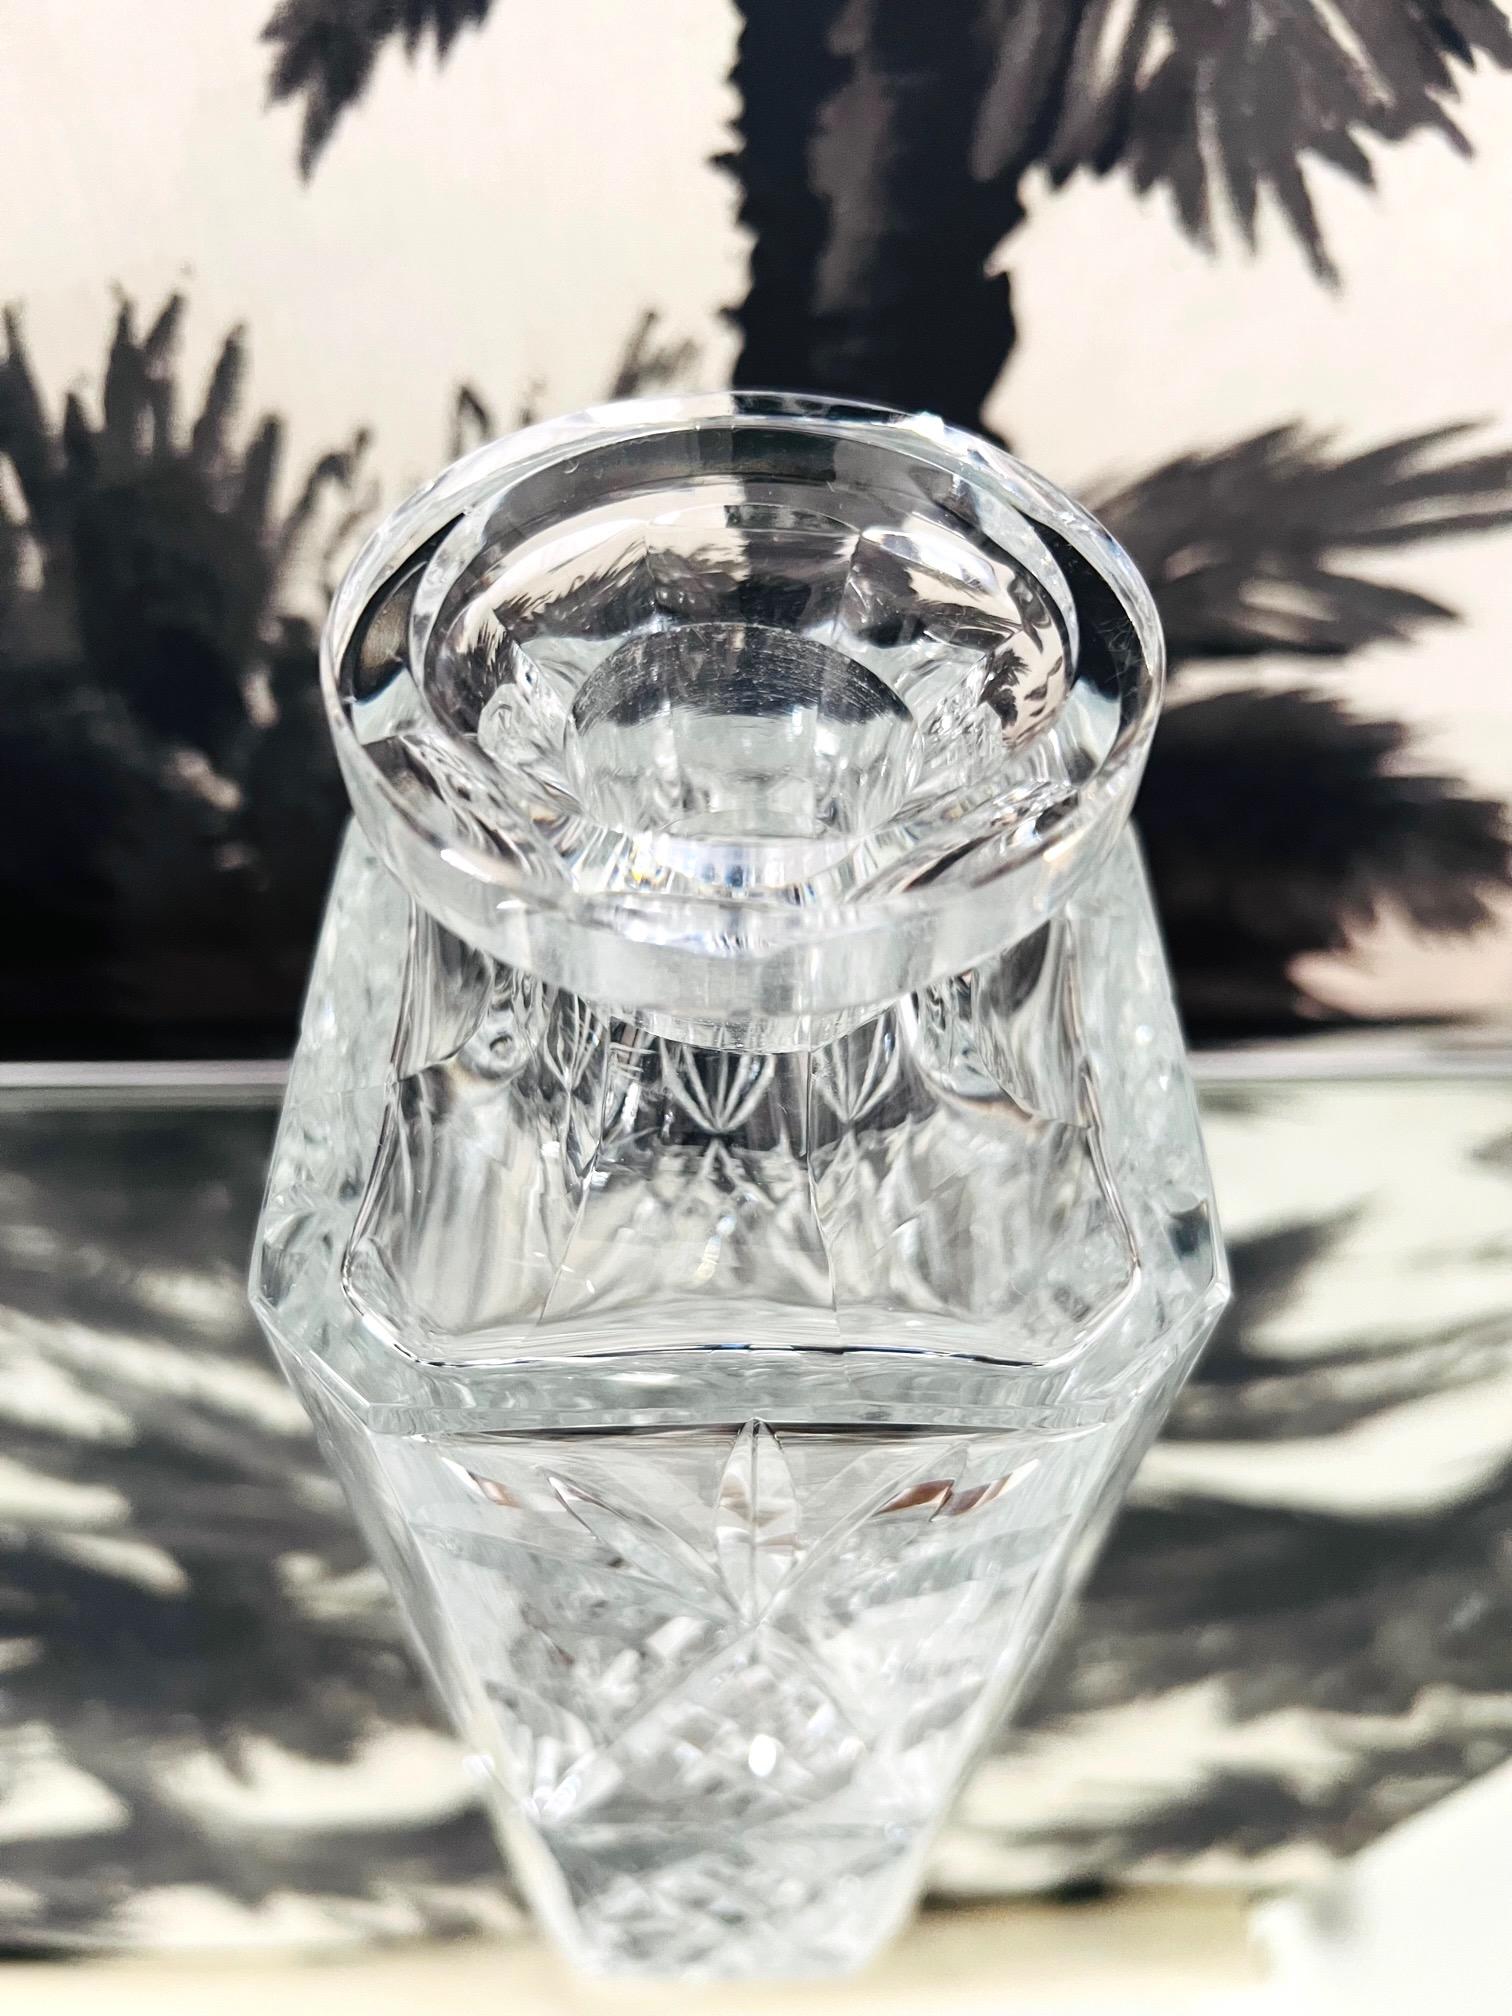 Late 20th Century Vintage Waterford Crystal Whiskey Decanter with Etched Designs, C. 1980